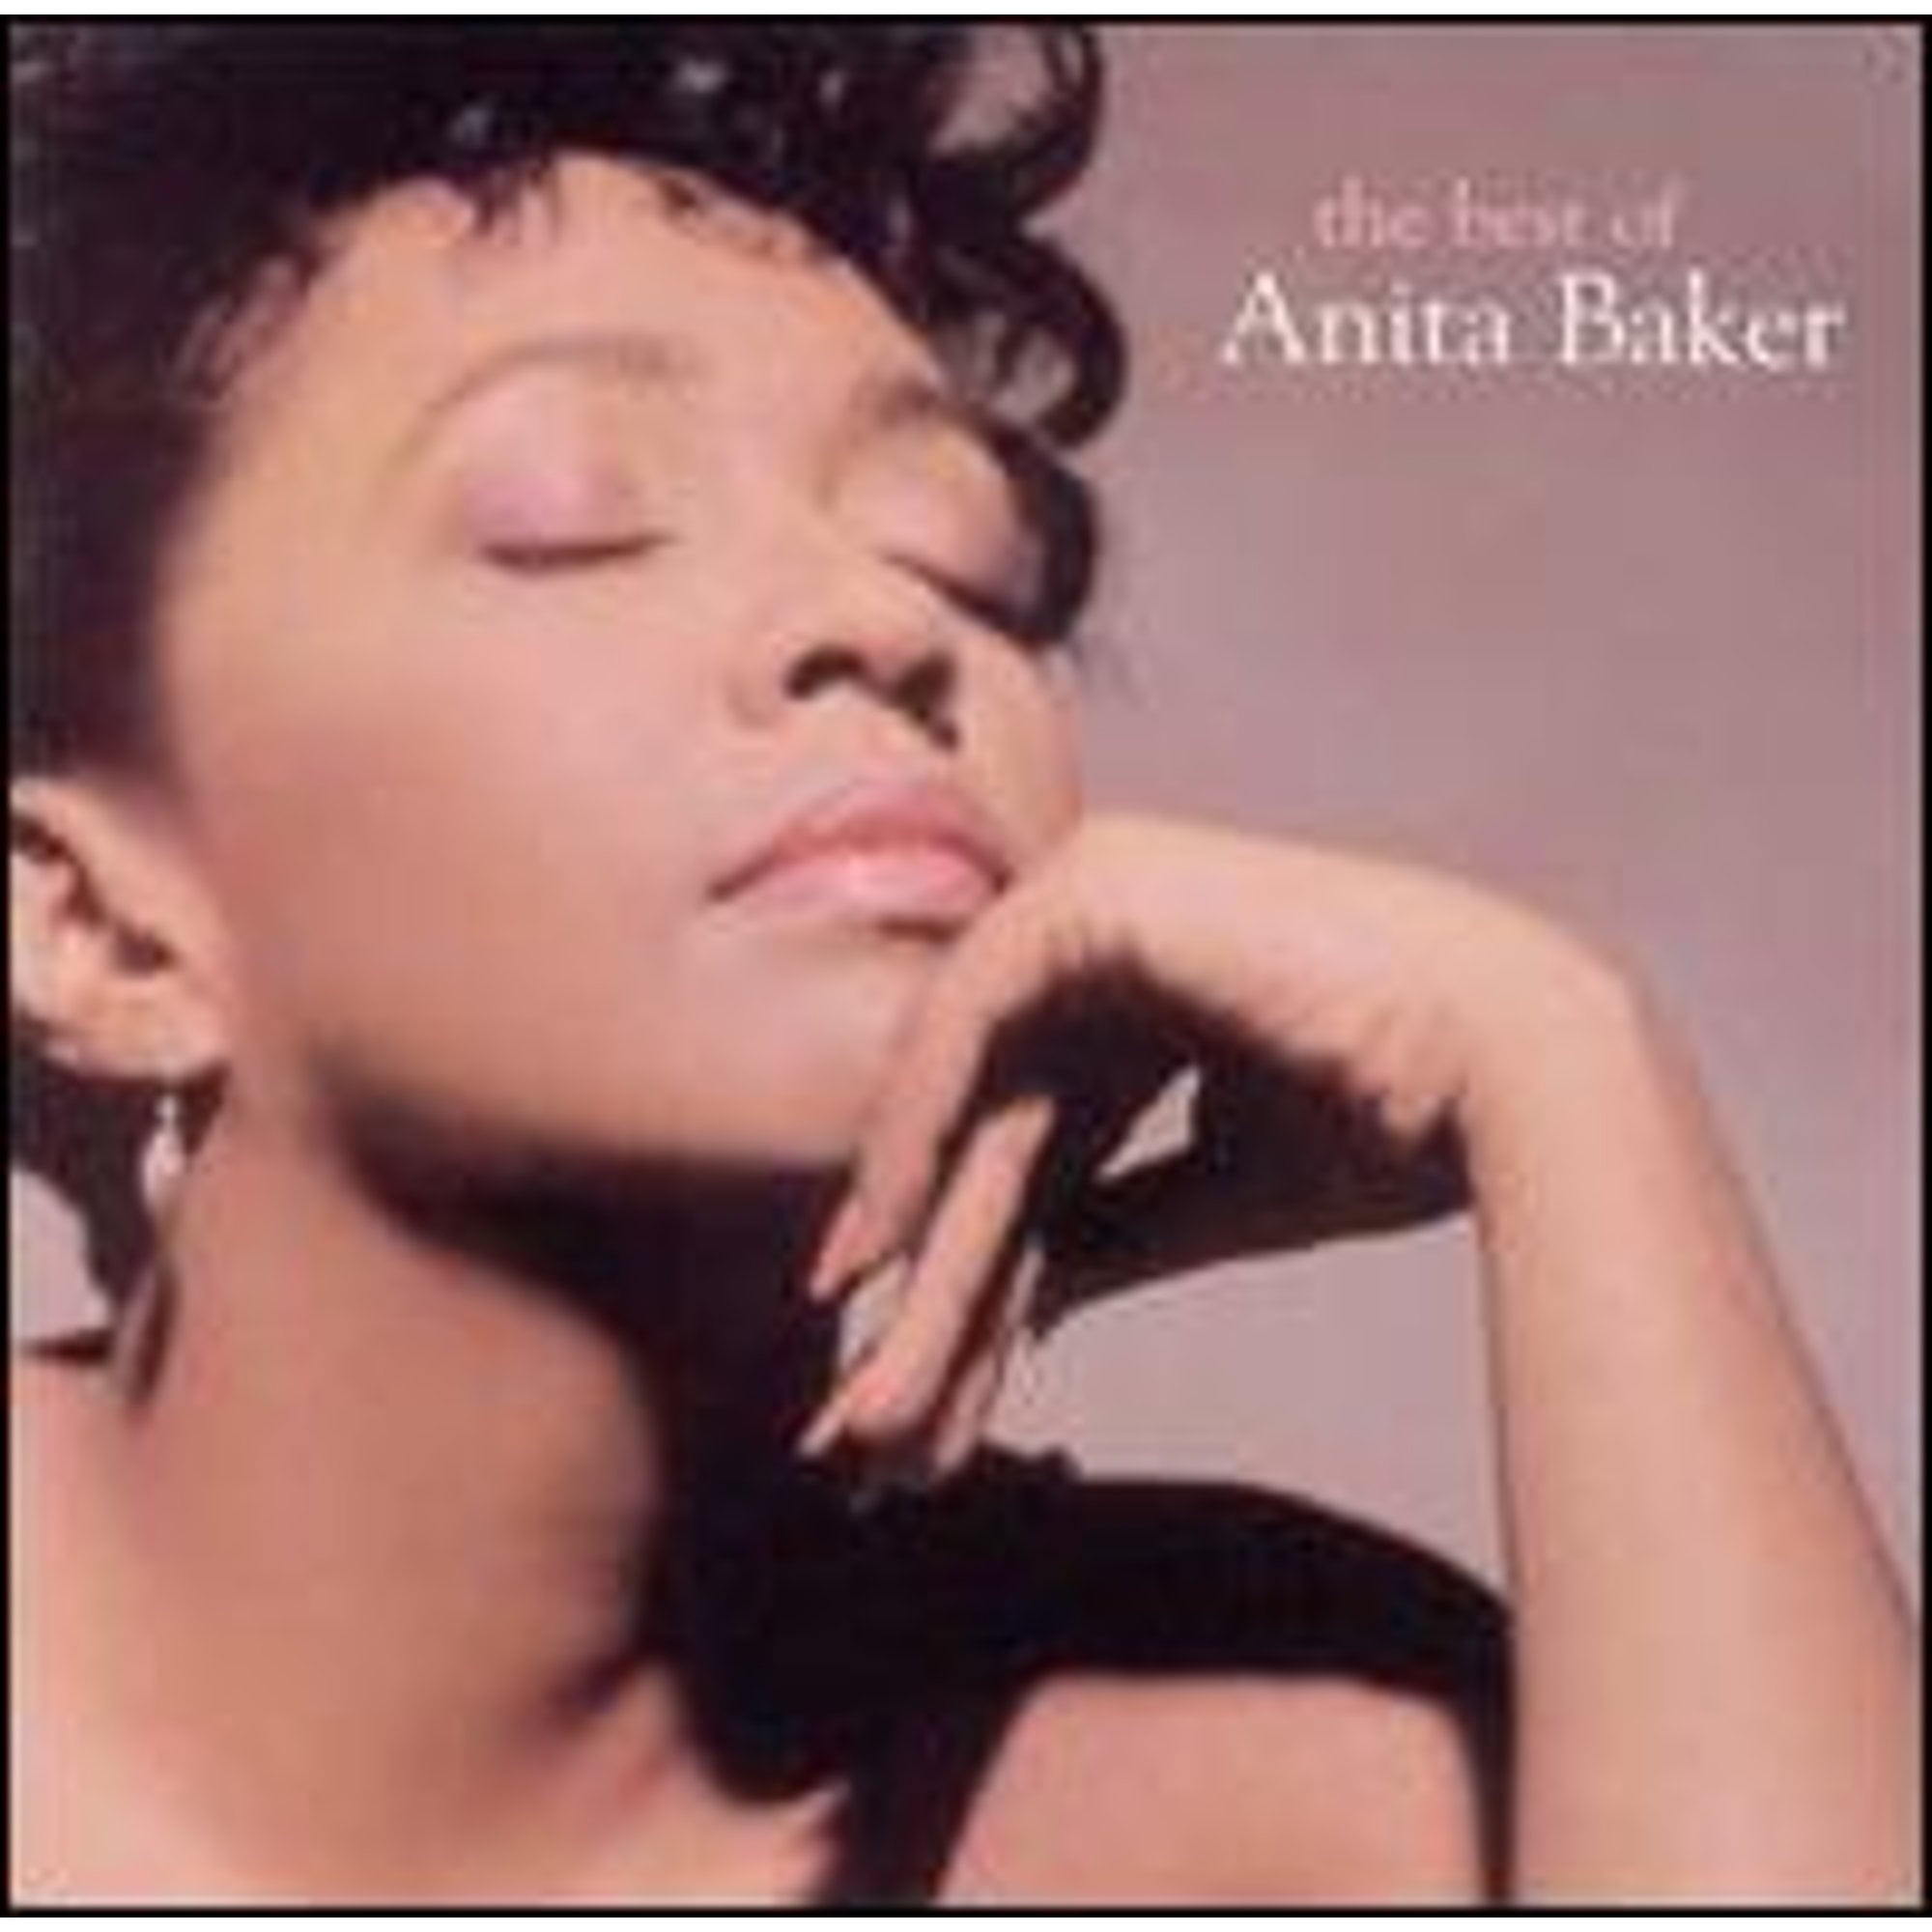 Pre-Owned The Best of Anita Baker (CD 0081227820923) by